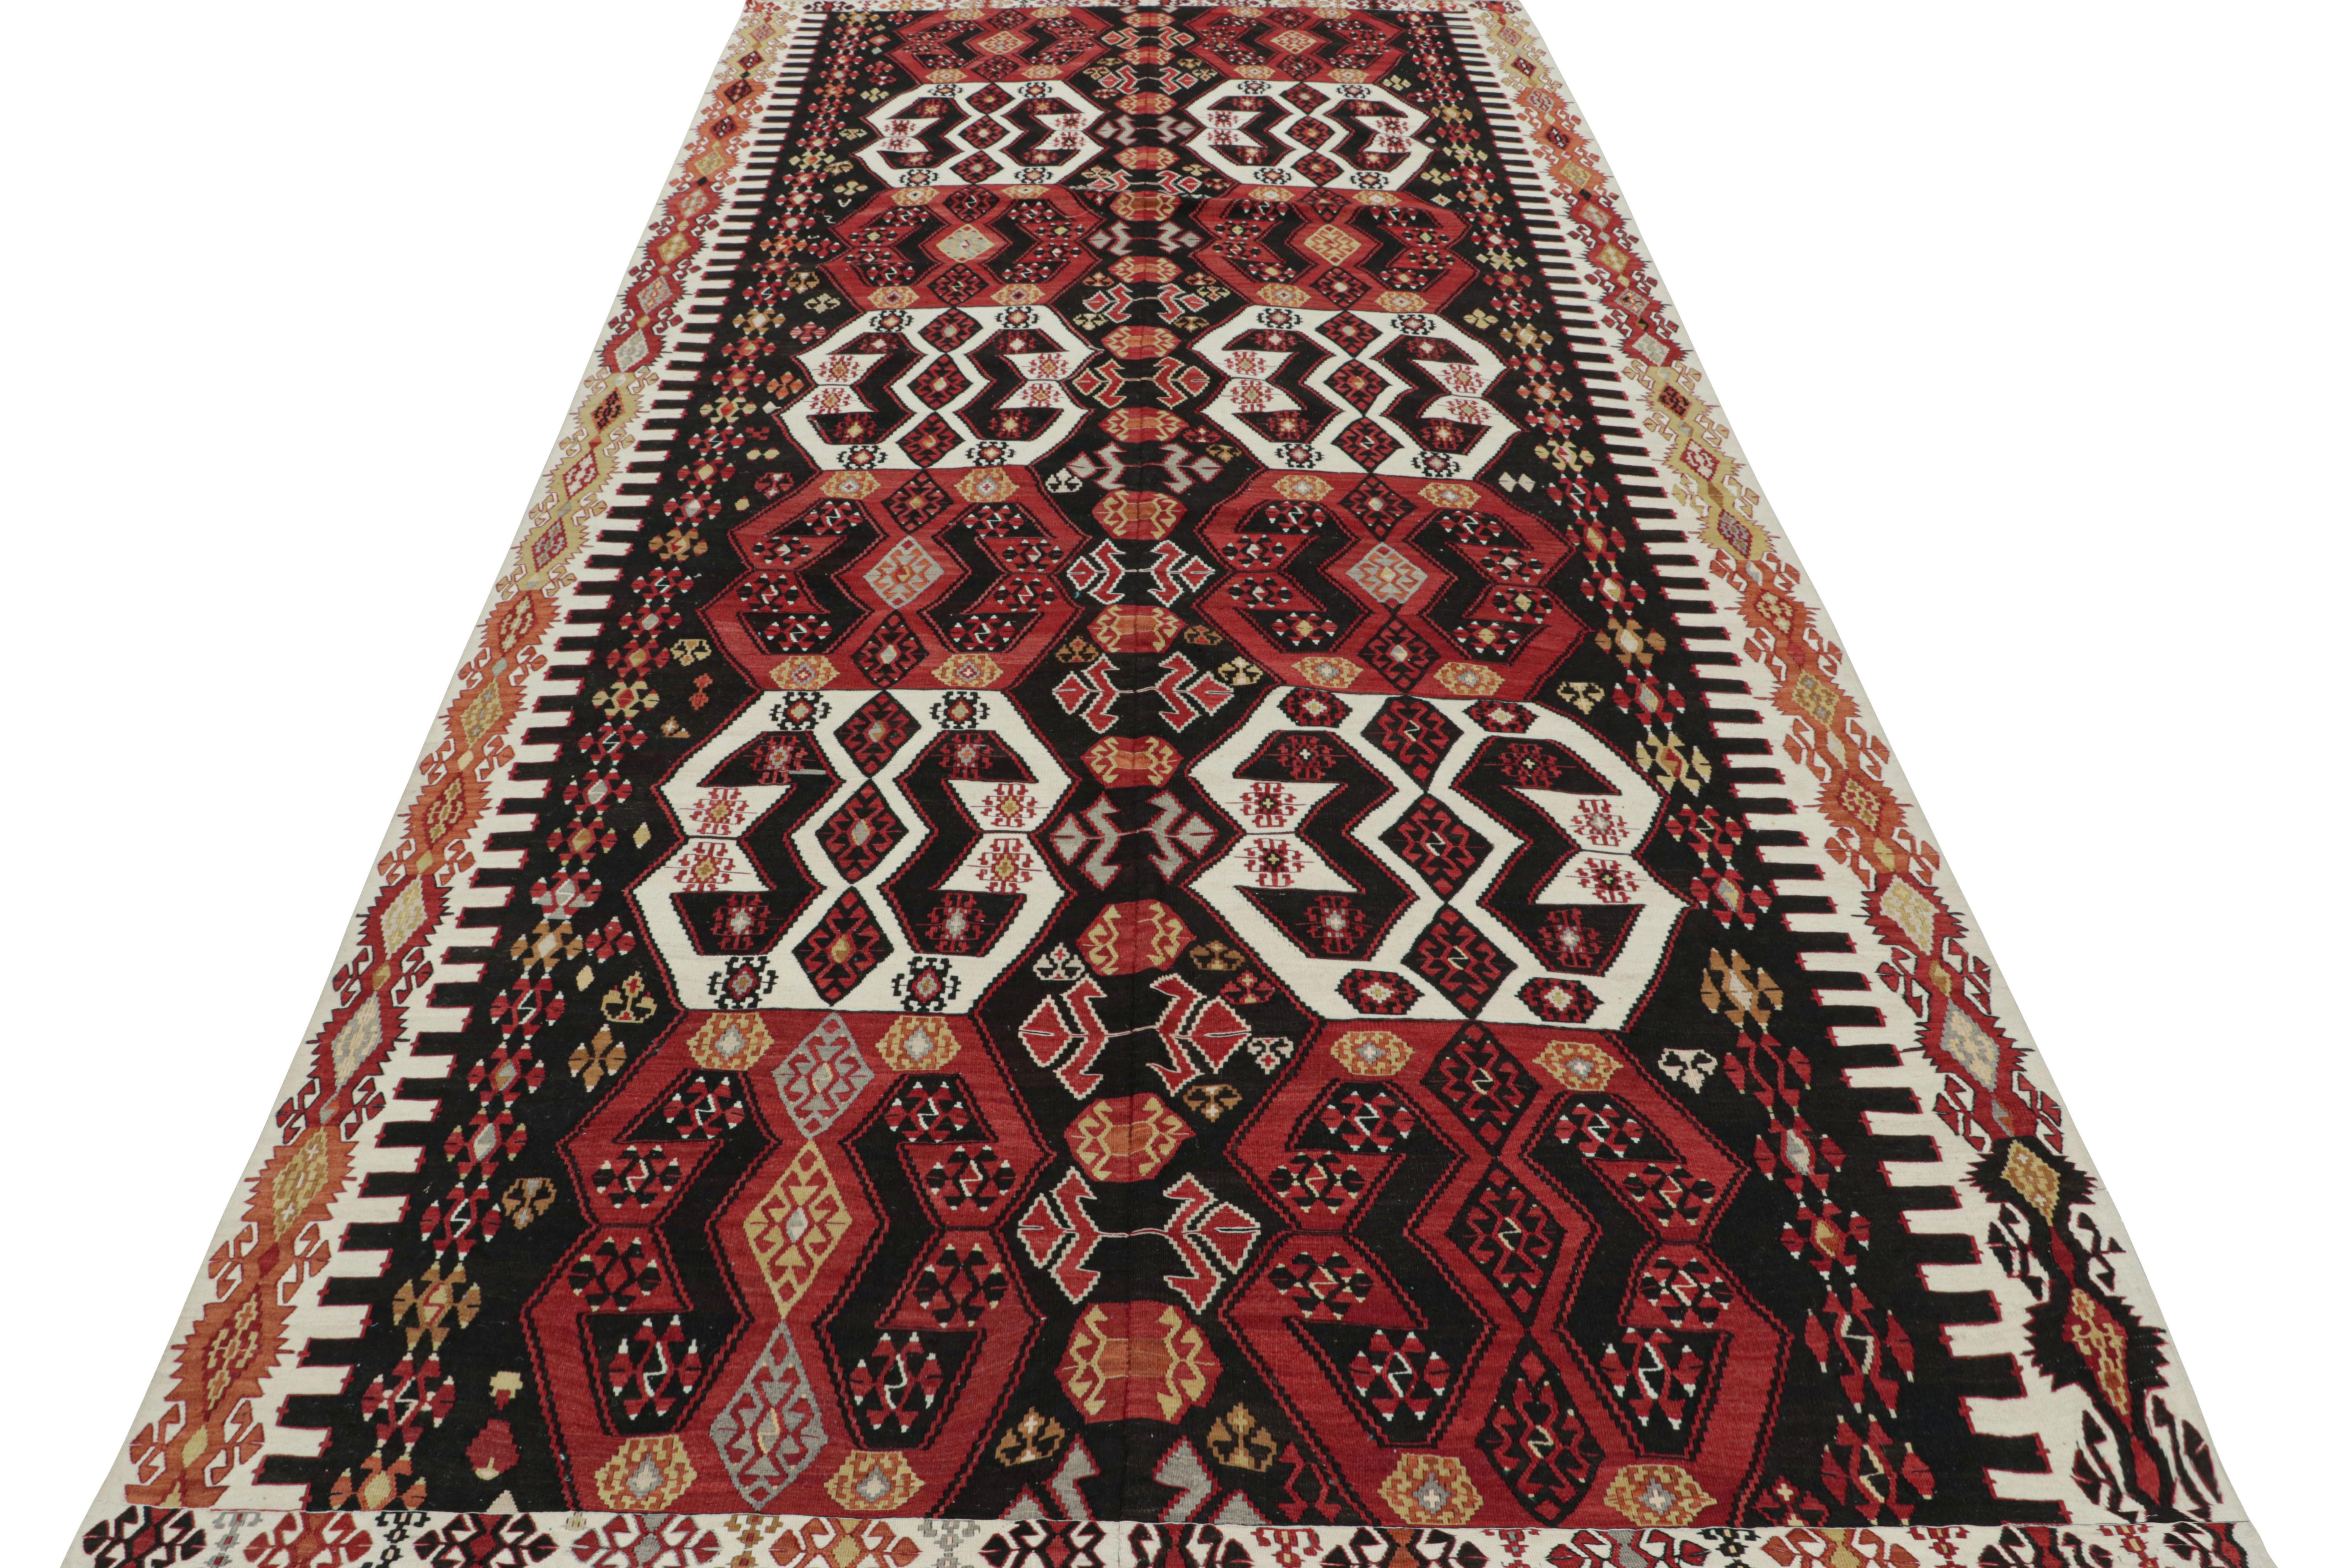 Hand-Woven Vintage Midcentury Malatya Red and Off-White Wool Kilim Rug by Rug & Kilim For Sale